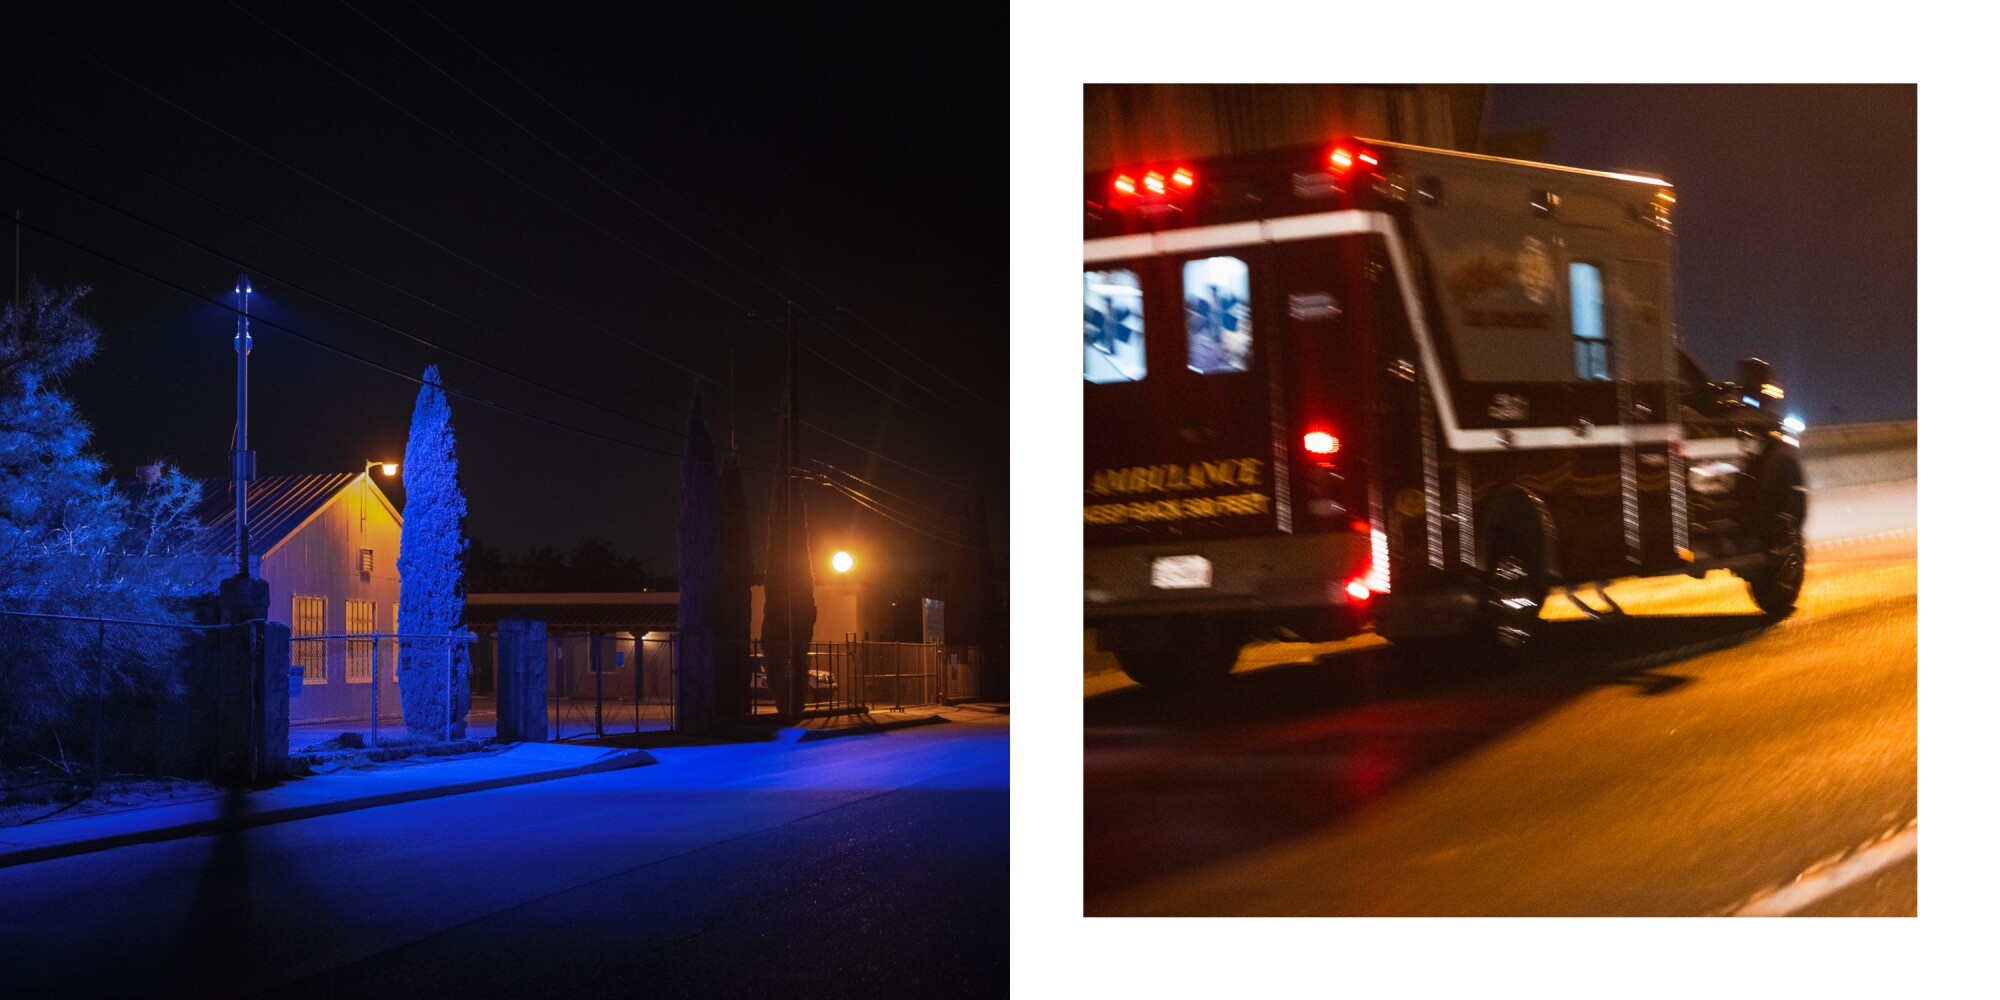 Left: An empty road in El Paso. Right: An ambulance drives into El Paso on Highway 54.